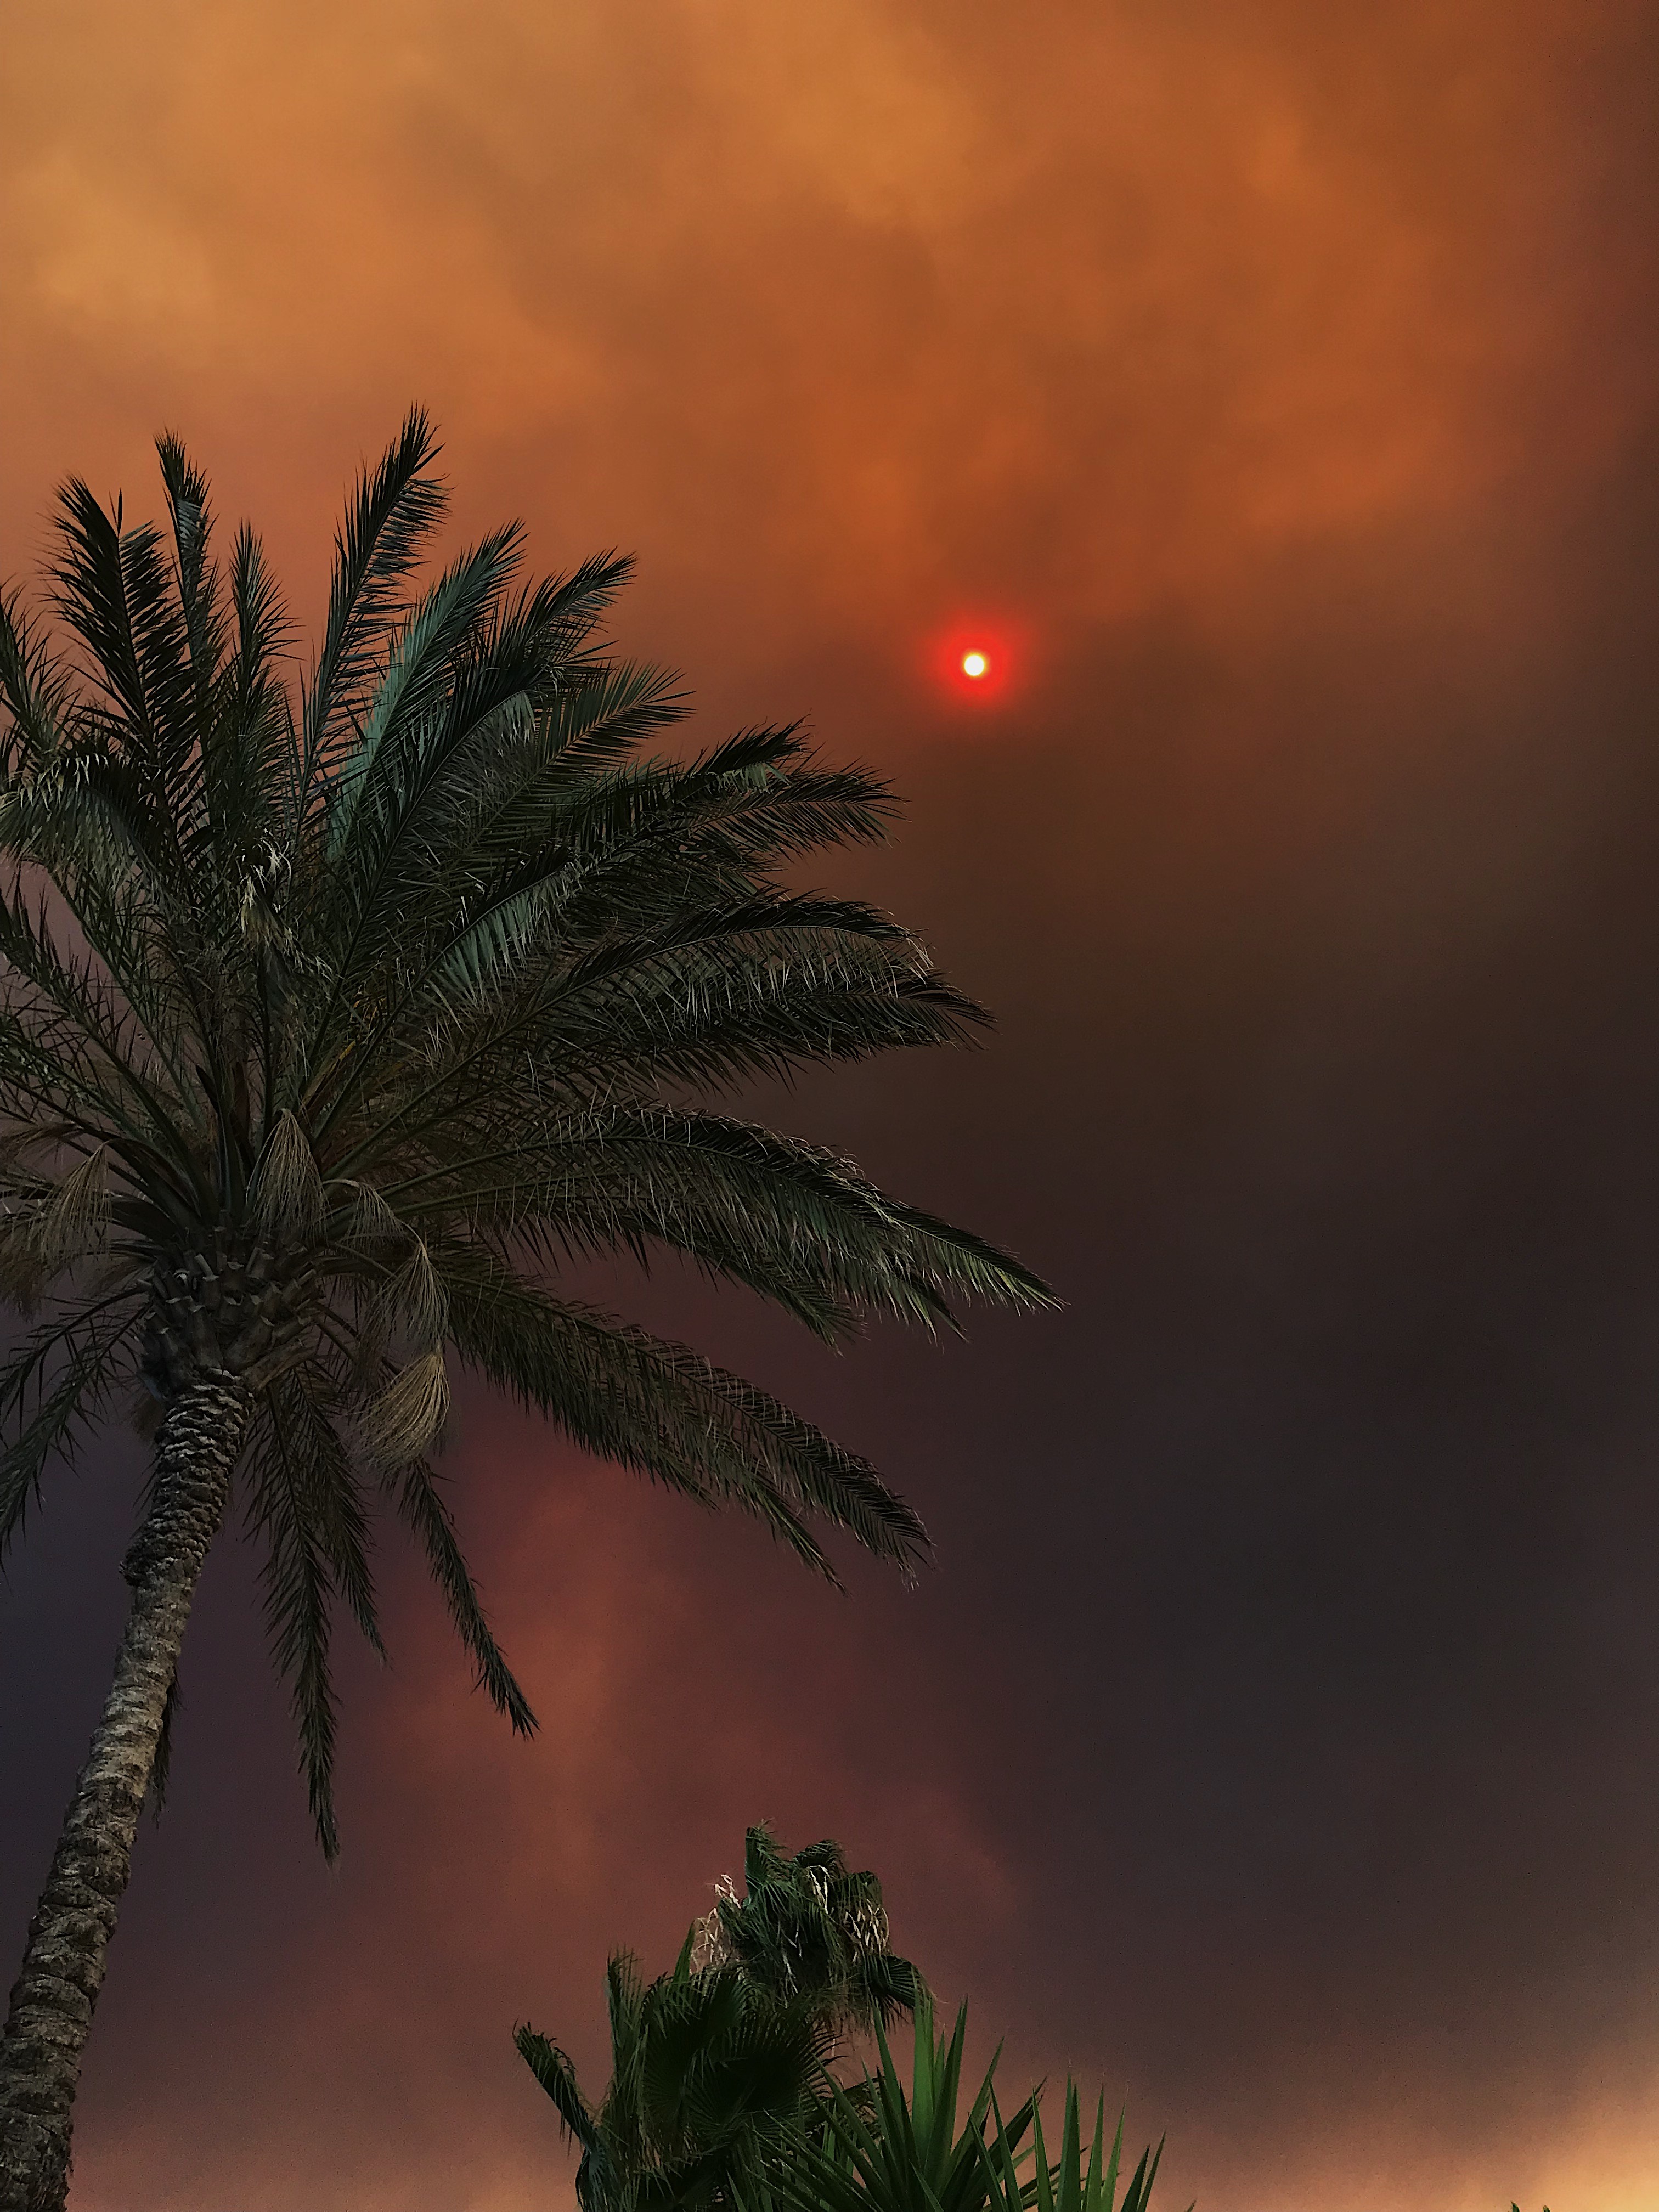 Palm trees under a red sun in a cloudy sky. 